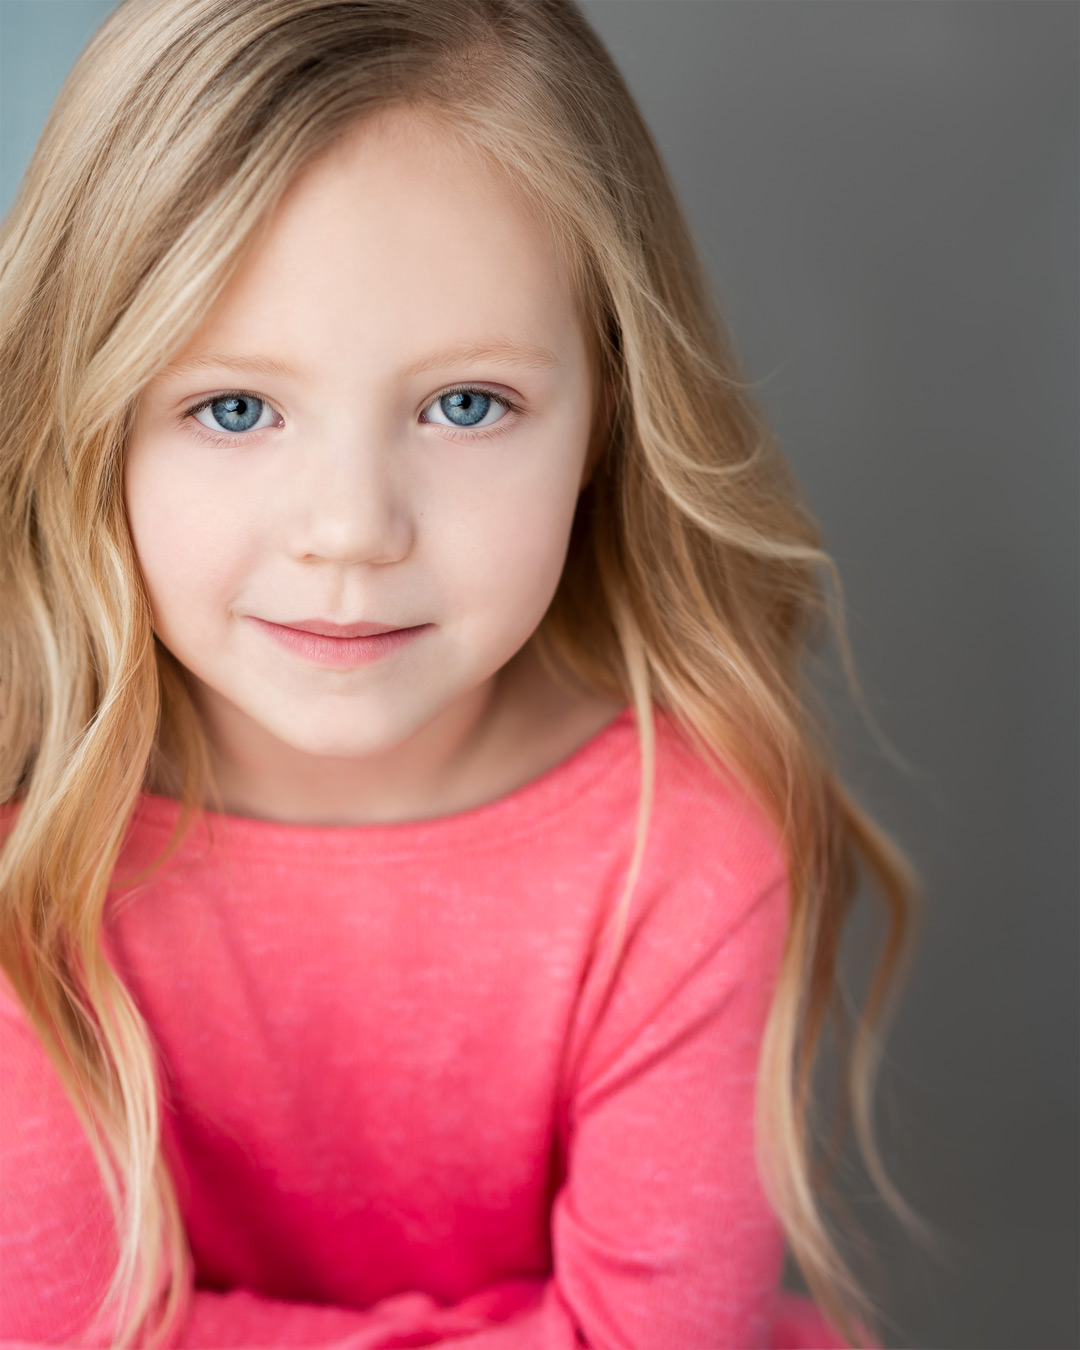 4year old blonde child actor Leia Bajic from LeBlanc school of acting